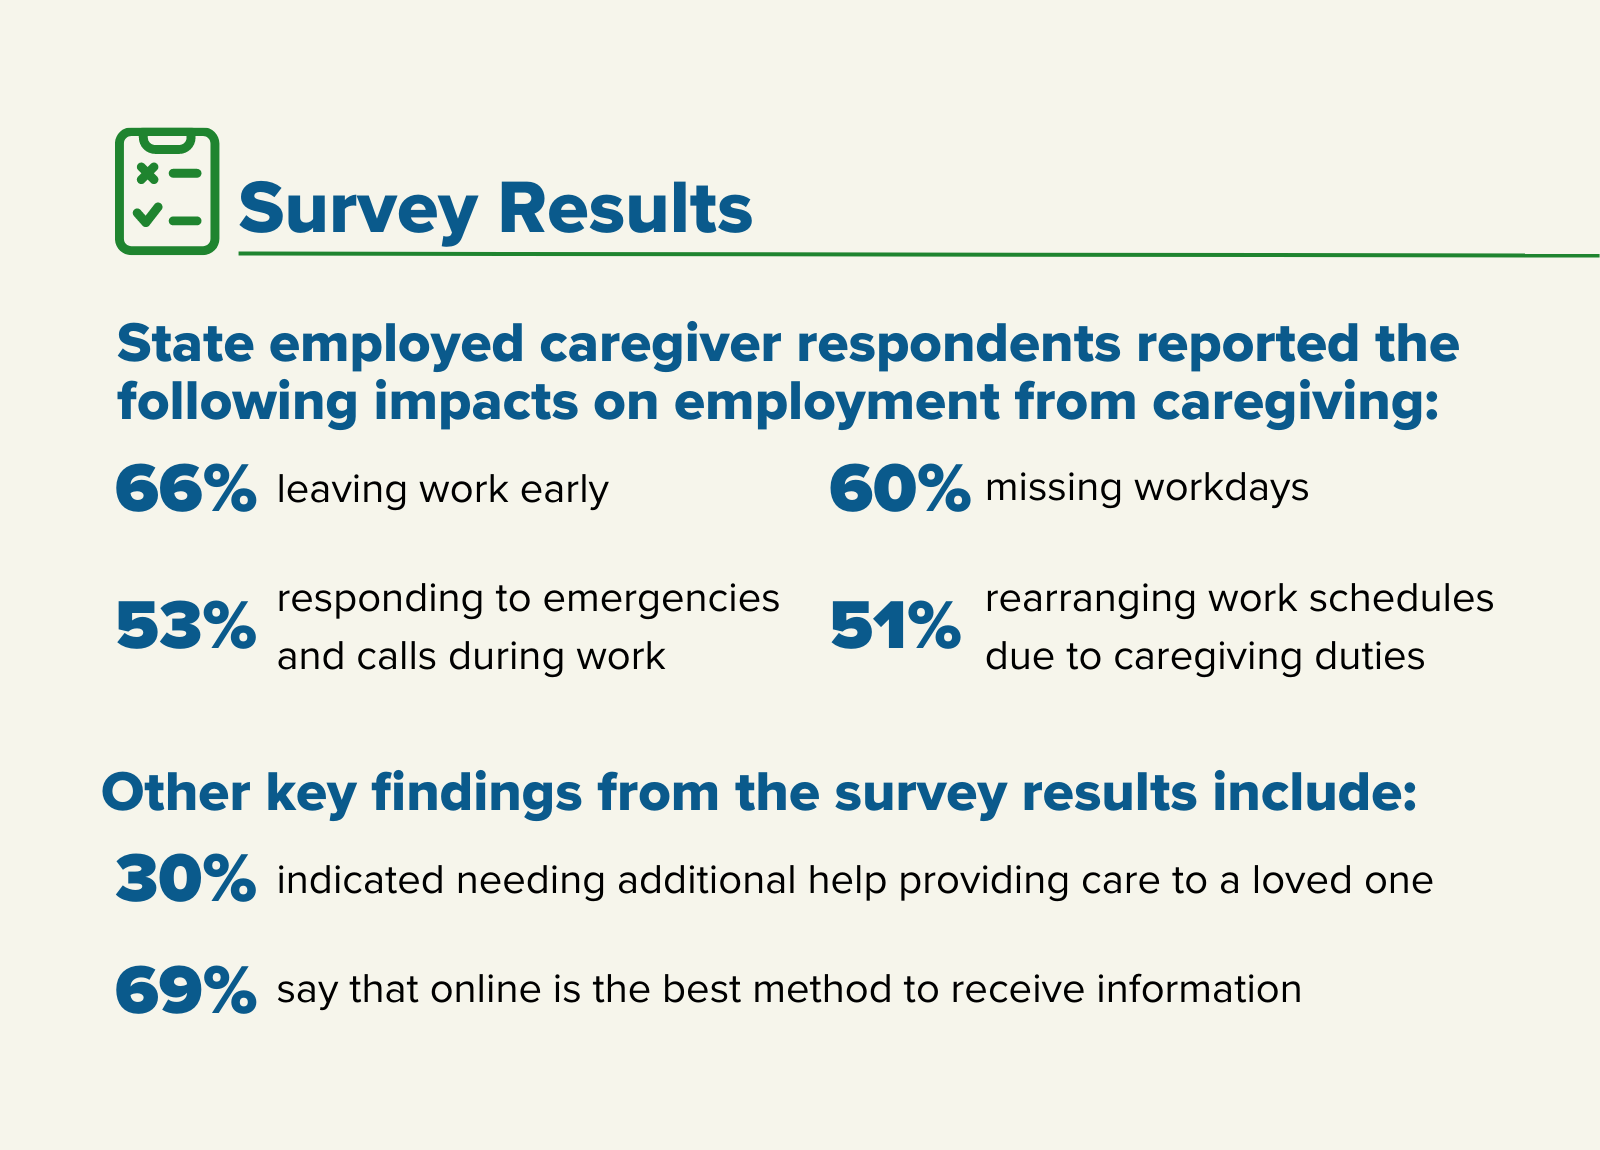 Survey Results State employed caregiver respondants reported the following impacts on employment from caregiving: 66% leaving work early 60% missing workdays 53% responding to emergencies and calls during work 51% rearranging work schedules due to caregiving duties Other key findings from the survey results include: 30% indicated needing additional help providing care to a loved one 69% say that online is the best method to receive information